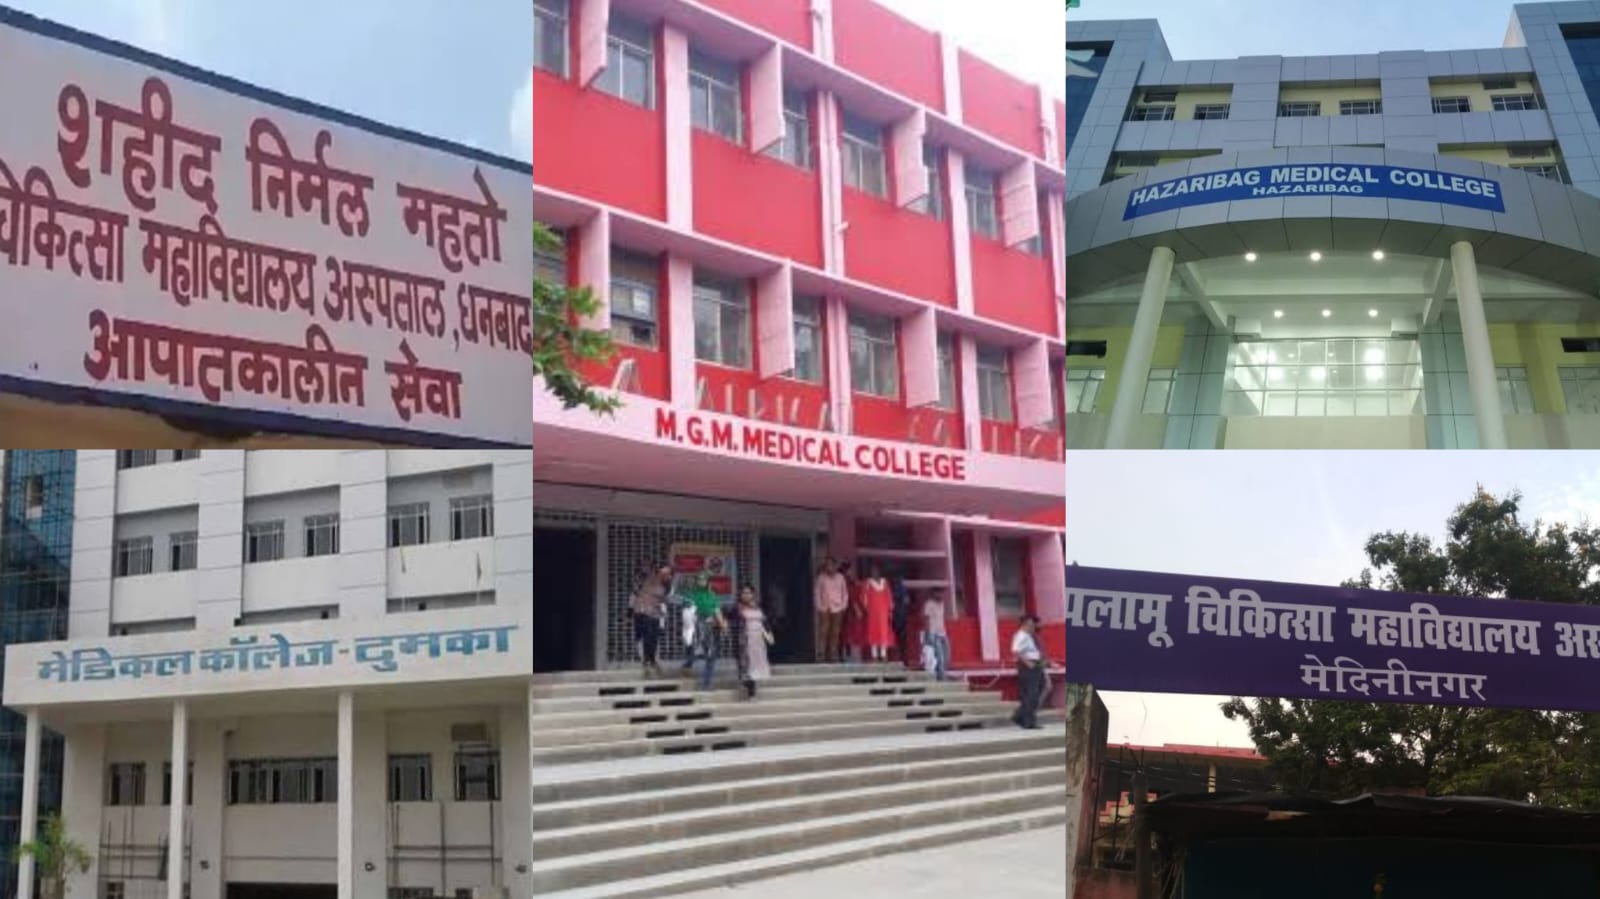 Contractual teachers to fill vacant posts in 5 Jharkhand medical colleges